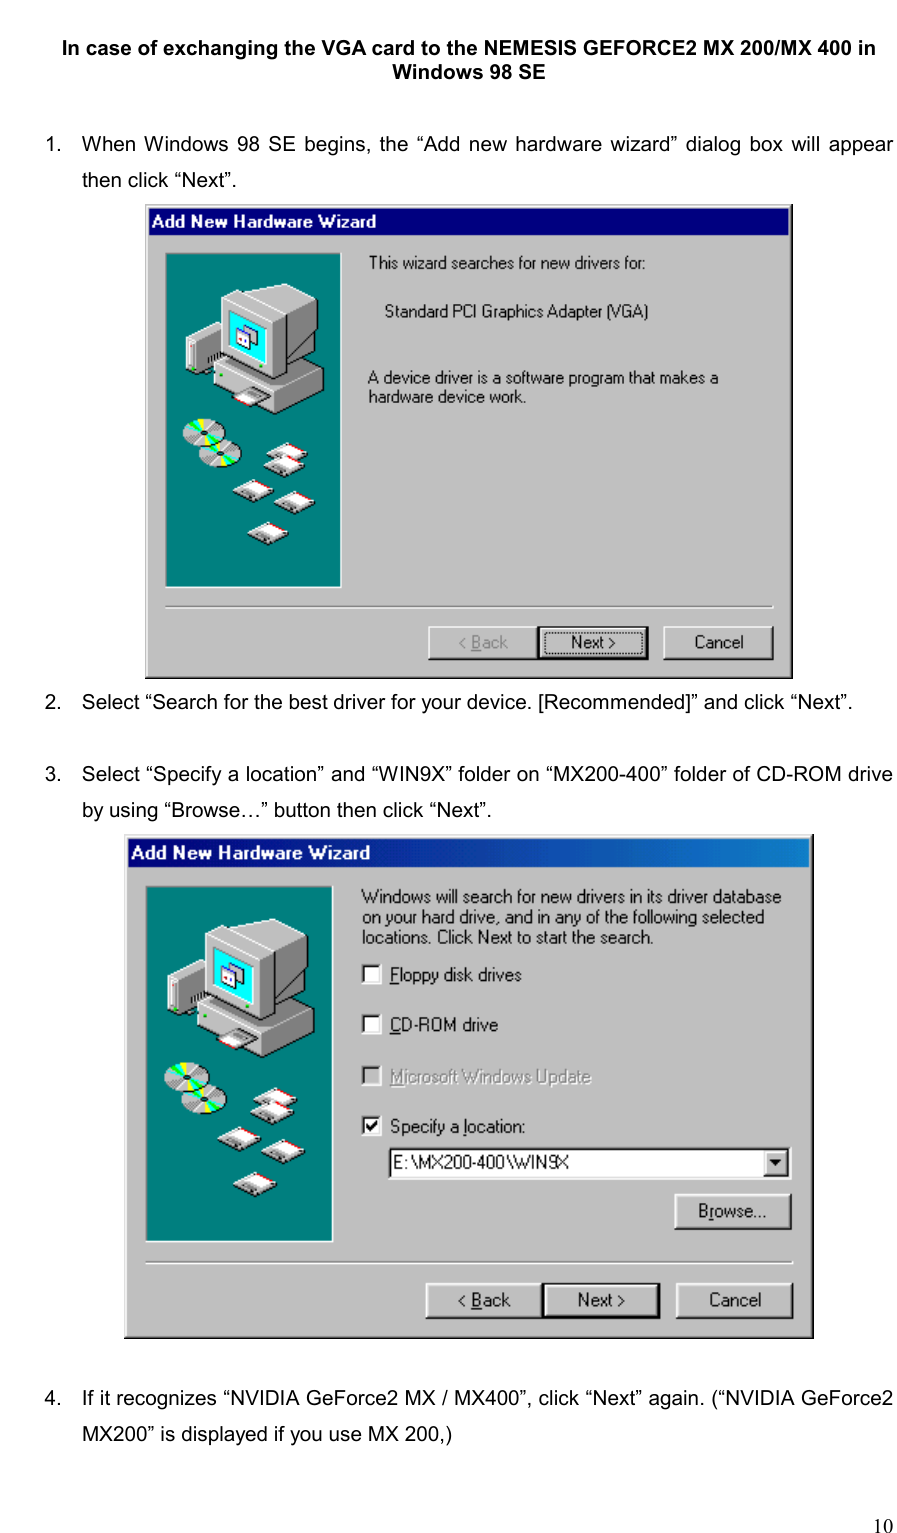     10 In case of exchanging the VGA card to the NEMESIS GEFORCE2 MX 200/MX 400 in Windows 98 SE   1.  When Windows 98 SE begins, the “Add new hardware wizard” dialog box will appear then click “Next”.  2.  Select “Search for the best driver for your device. [Recommended]” and click “Next”.  3.  Select “Specify a location” and “WIN9X” folder on “MX200-400” folder of CD-ROM drive by using “Browse…” button then click “Next”.   4.  If it recognizes “NVIDIA GeForce2 MX / MX400”, click “Next” again. (“NVIDIA GeForce2 MX200” is displayed if you use MX 200,)  